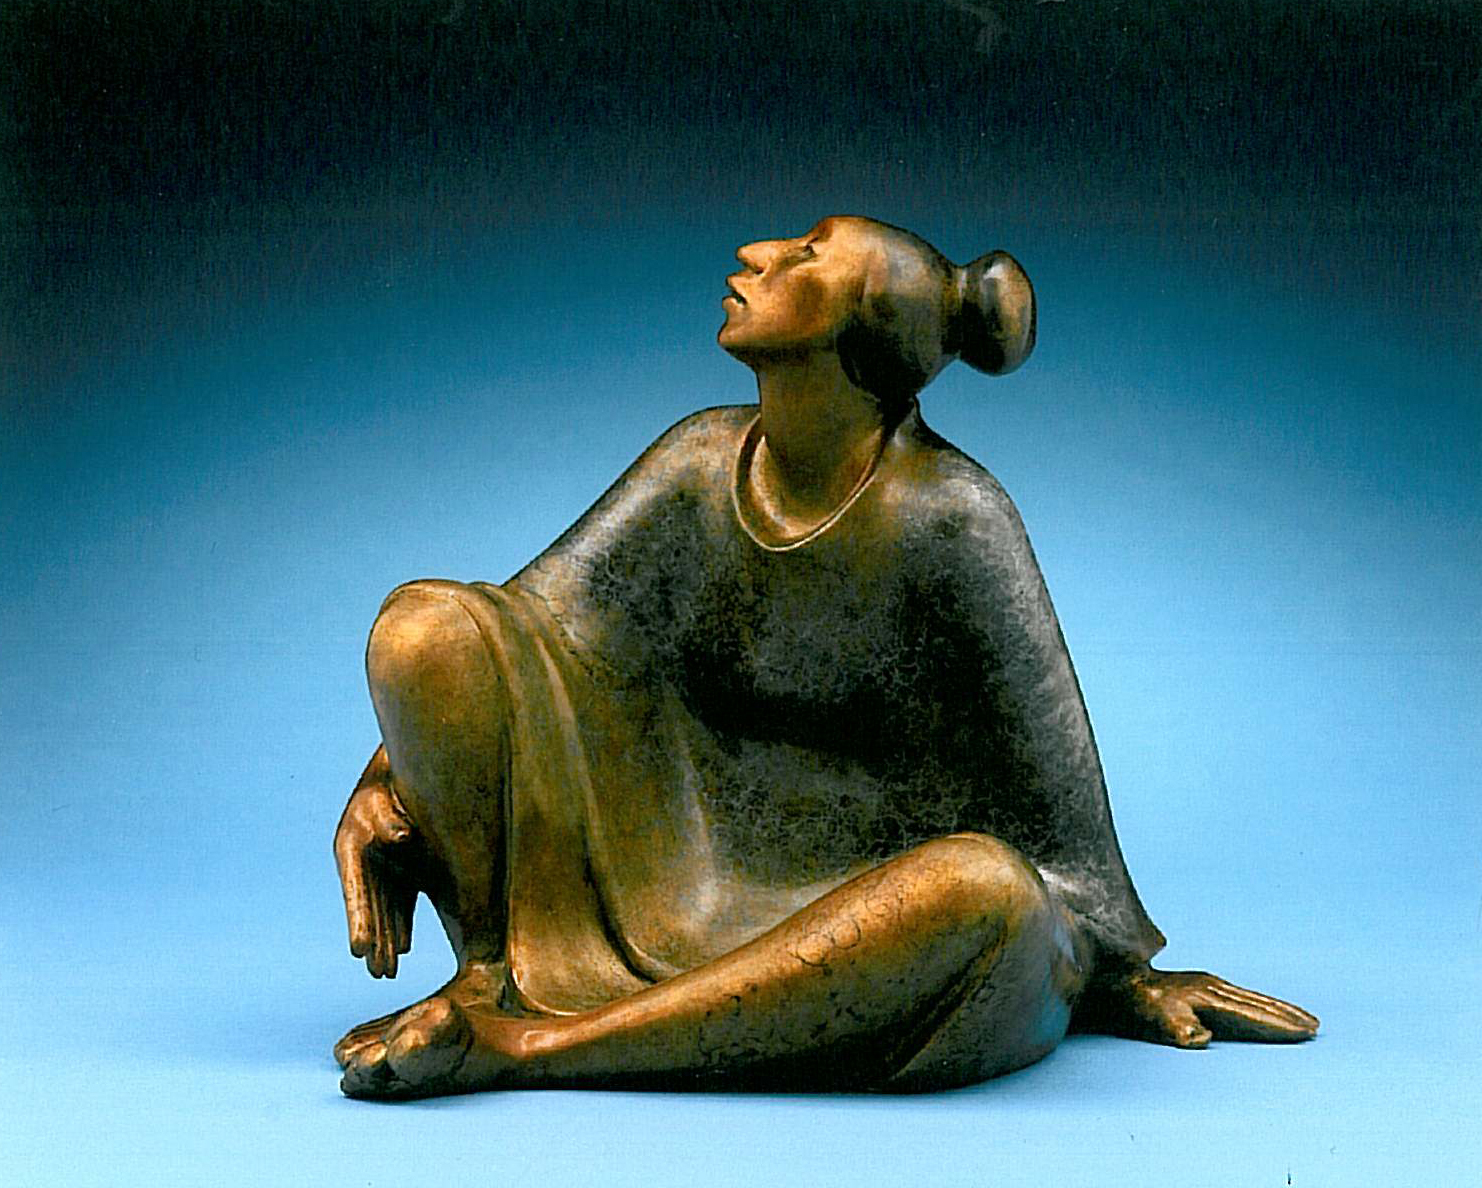 Wondering
by Shirley Thomson-Smith, FNSS
Bronze
11